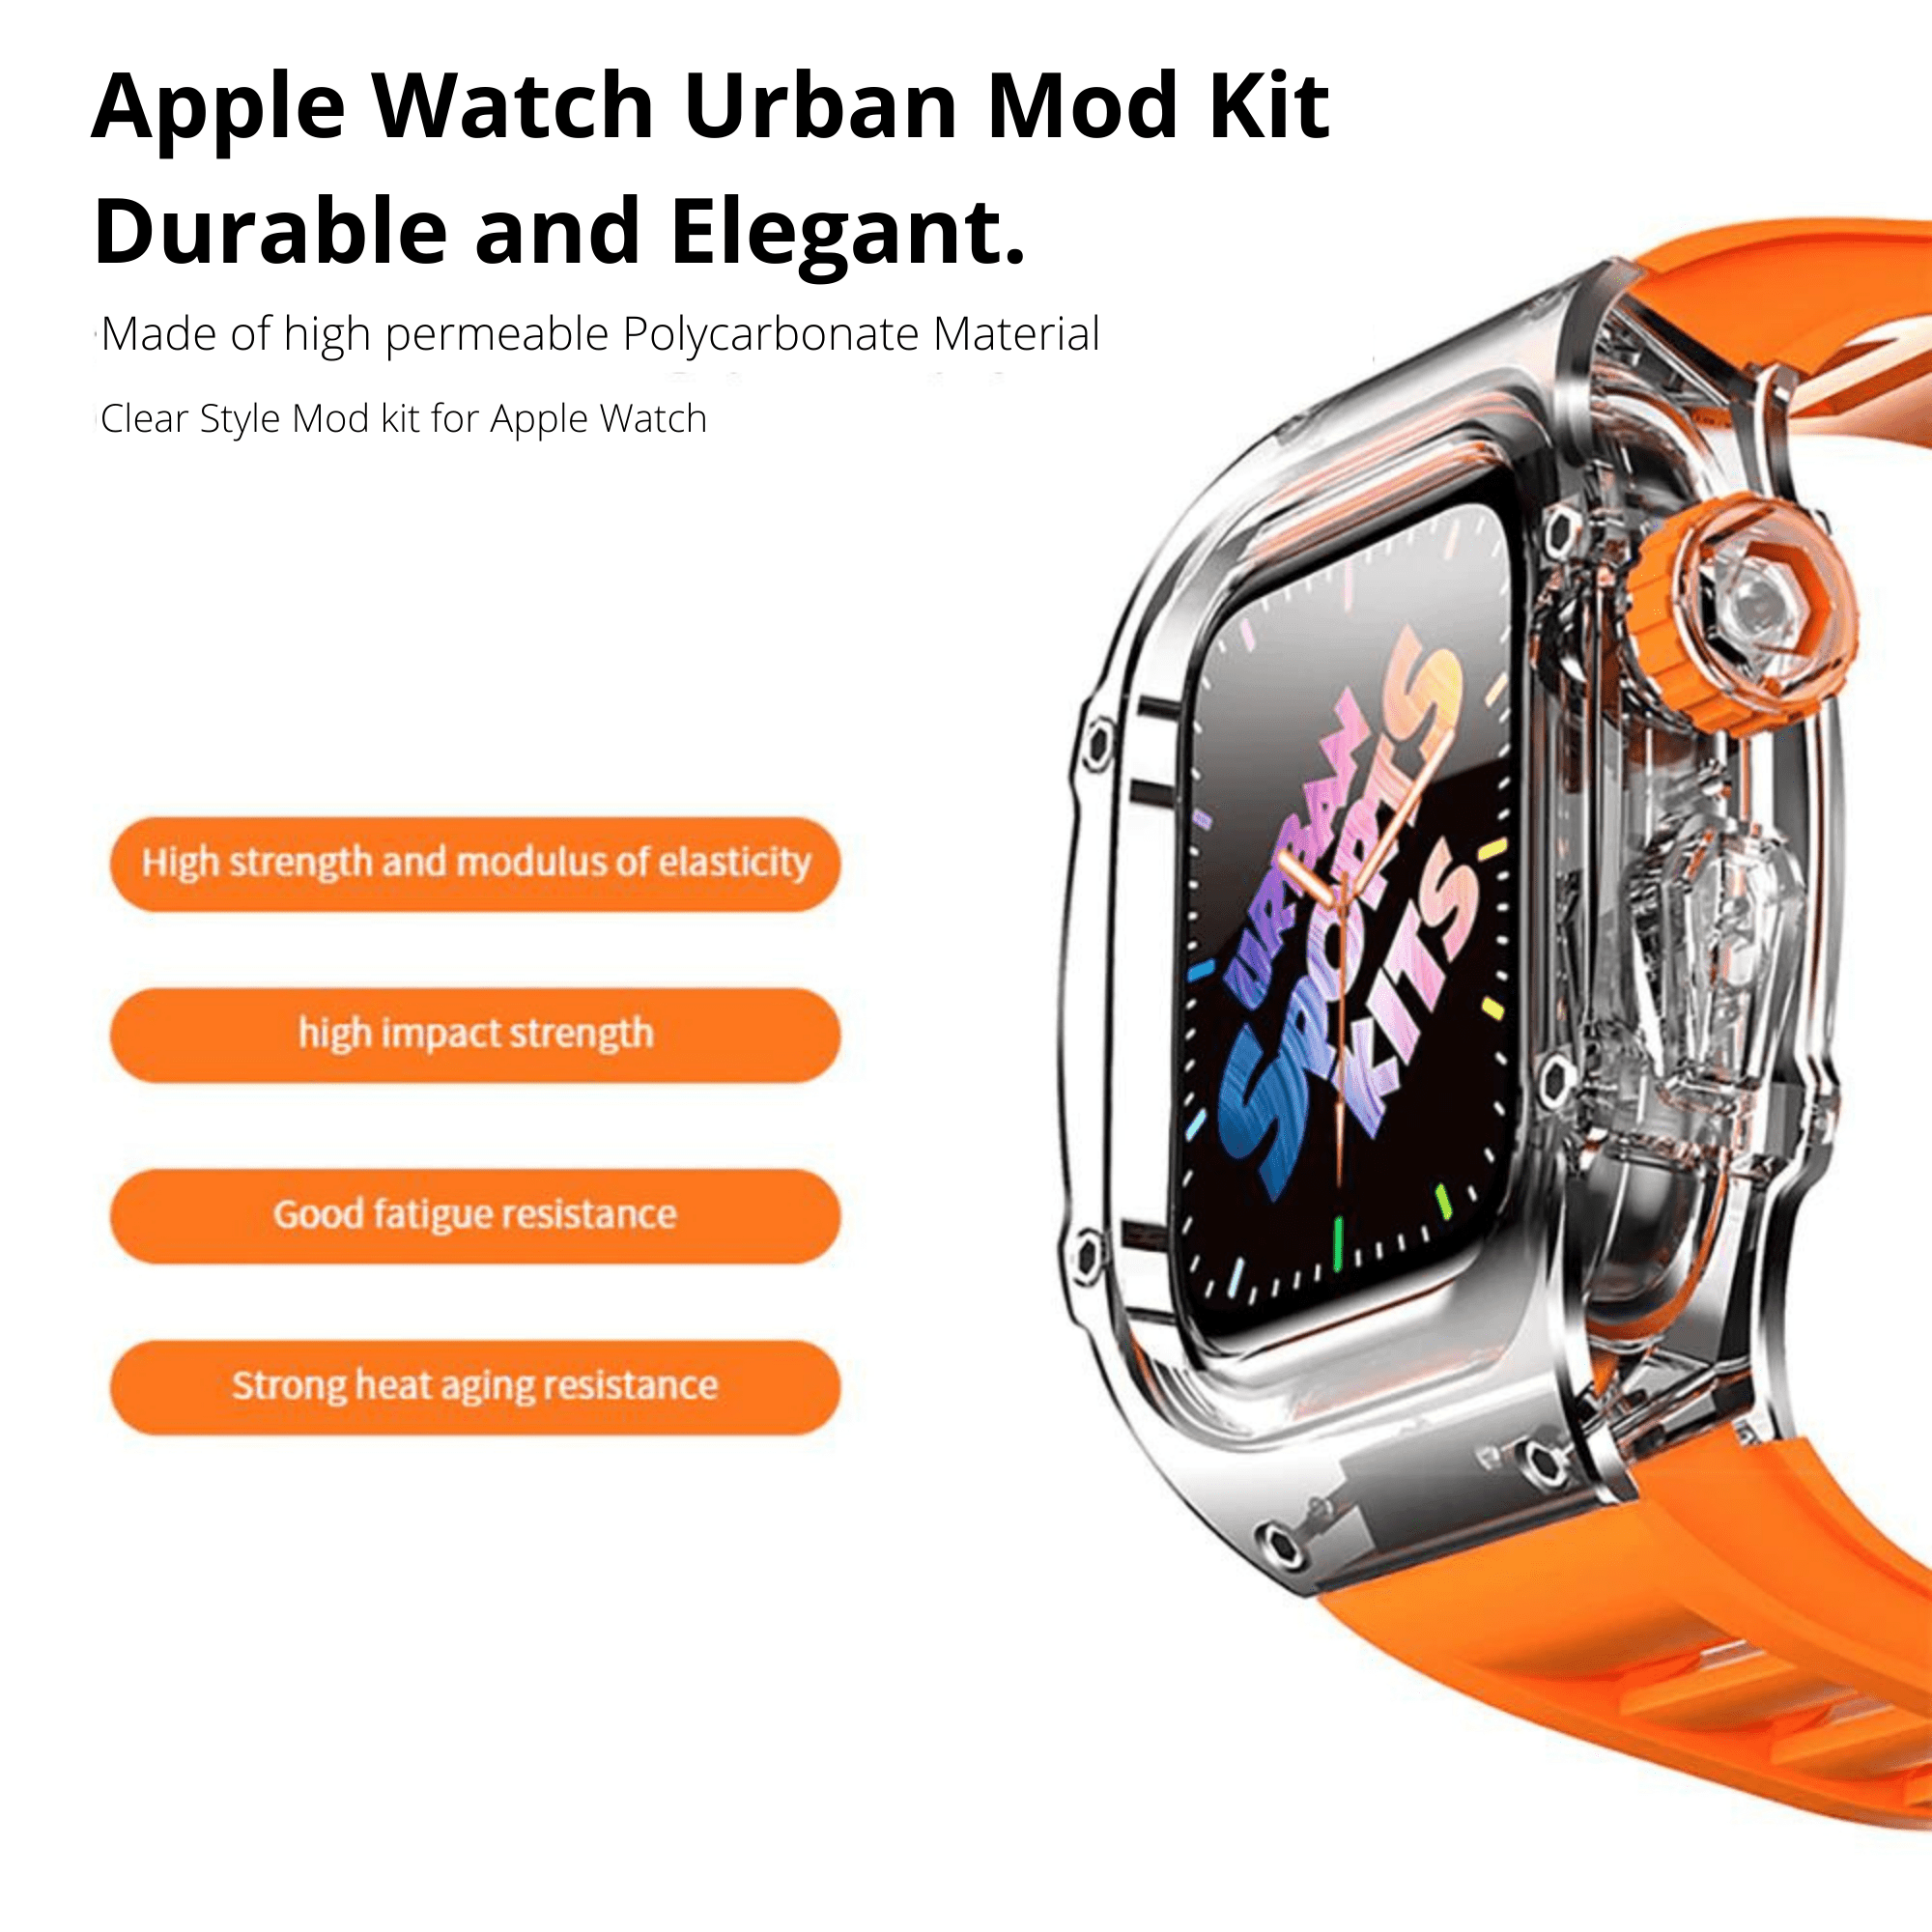 Mod Kit for Apple Watch | Luxury & Sporty Apple Watch Case | Replacement Apple Watch case for 7/8 accessory - 45 mm Carbon Black mod kits india dream watches apple watch